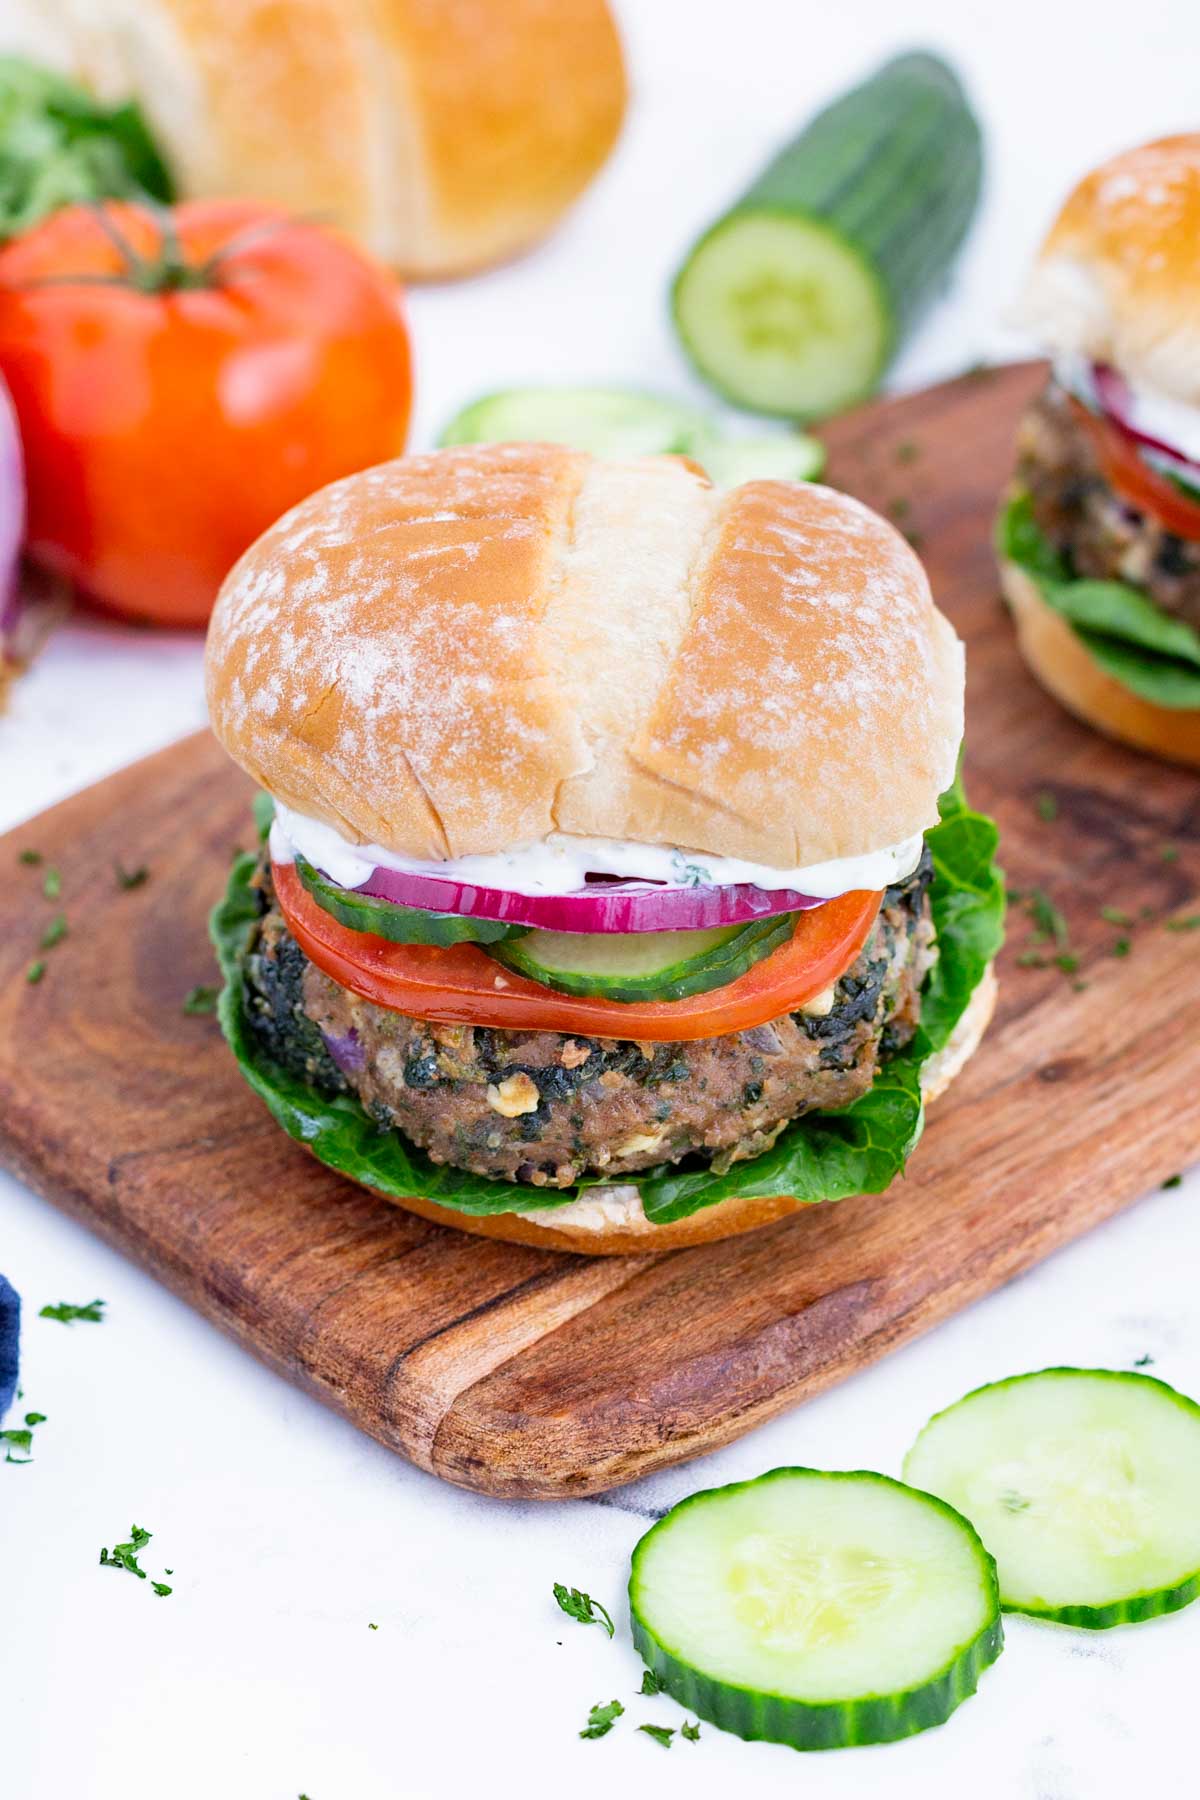 Top this Greek burger with tzatziki sauce, cucumber, and tomatoes.